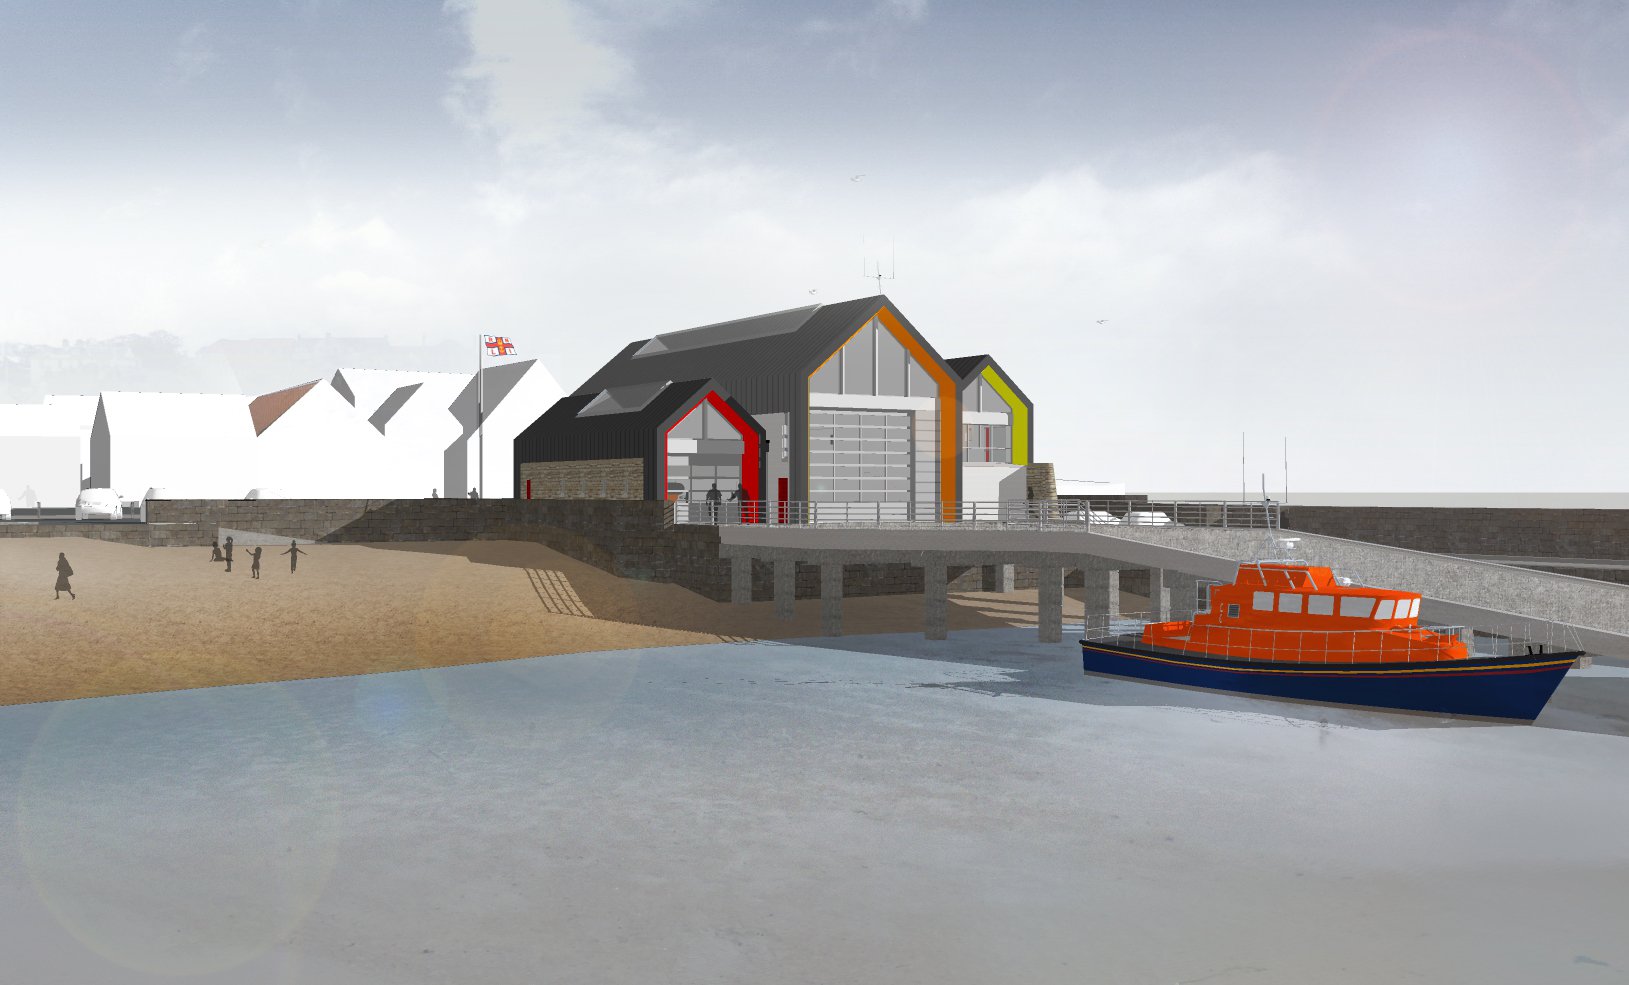 Providing technical expertise to facilitate a purpose-built new home for the RNLI in Fife